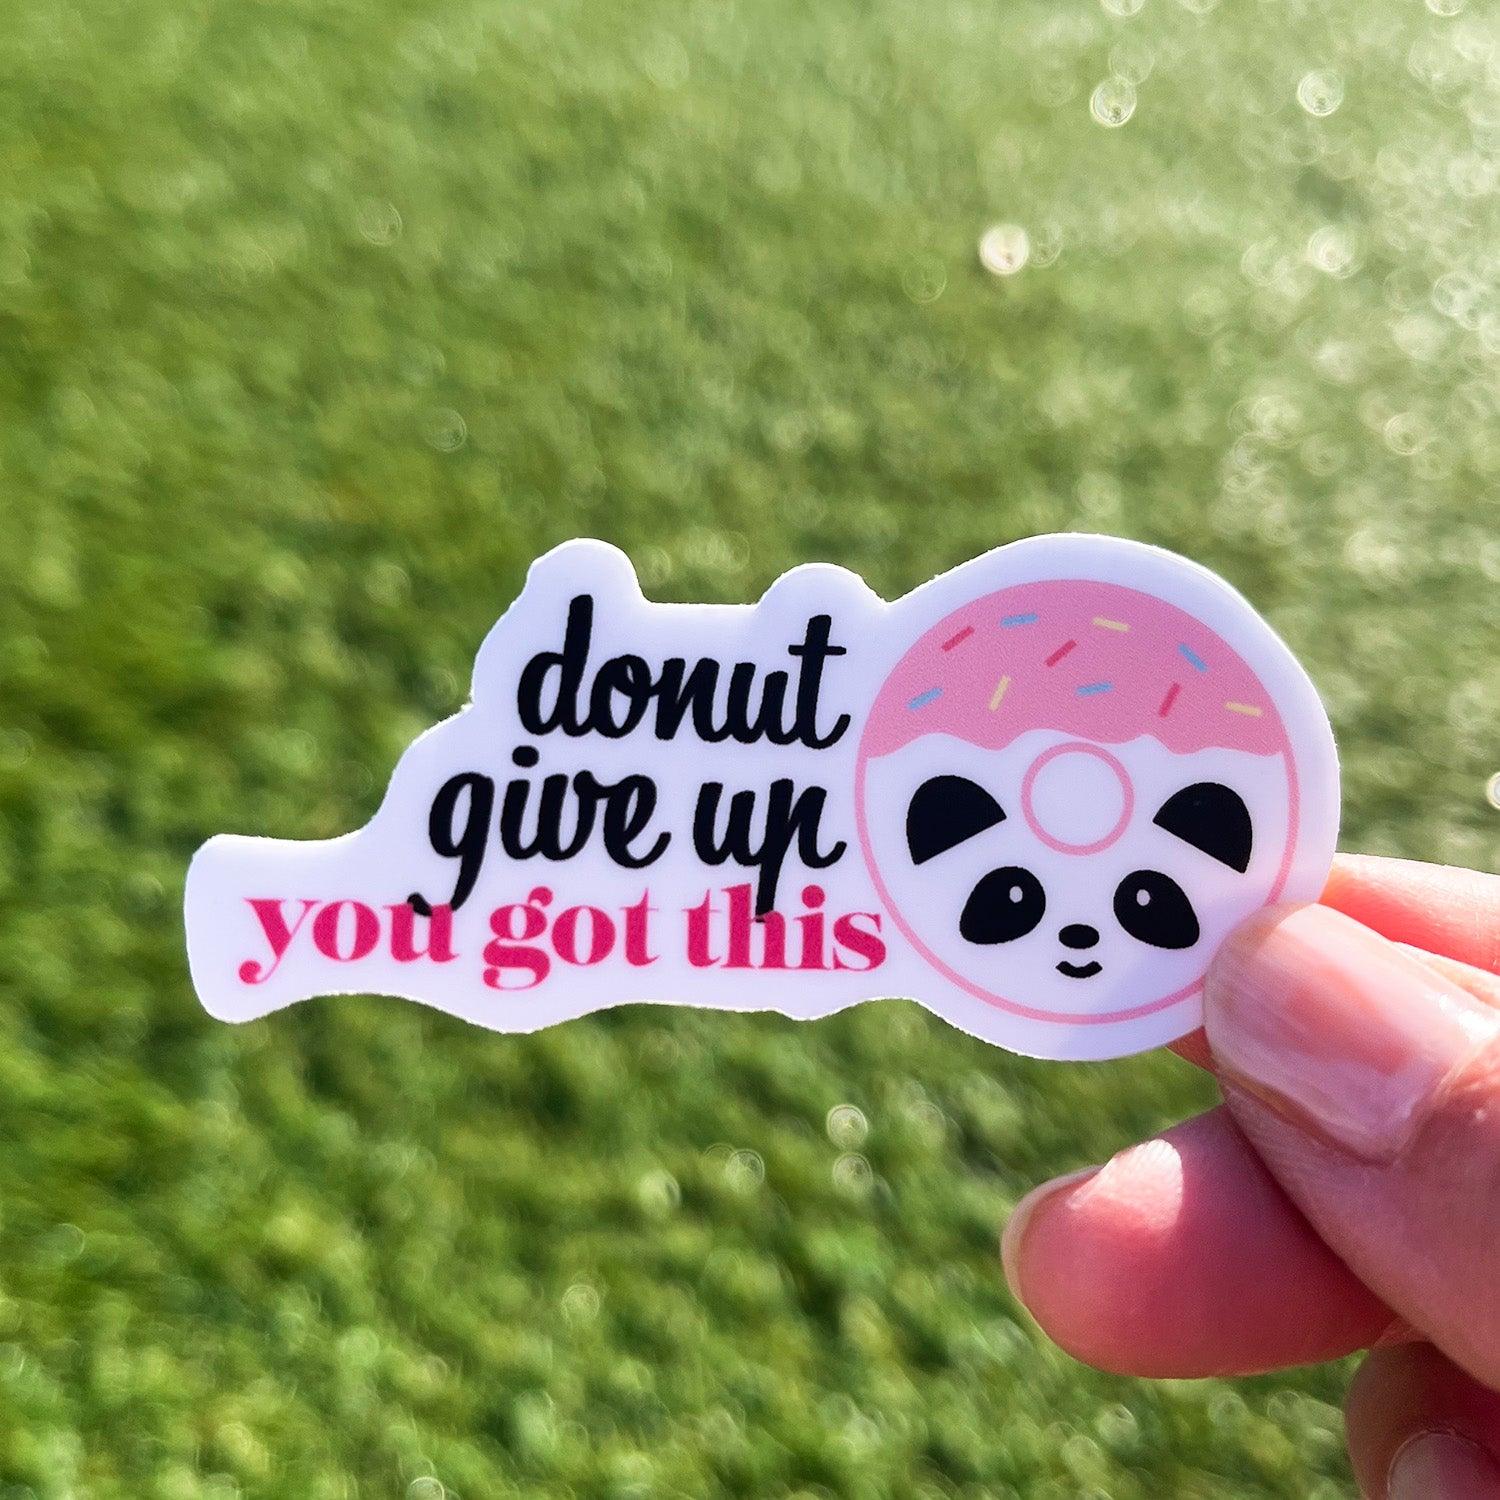 Donut give up sticker with grass and sunshine background